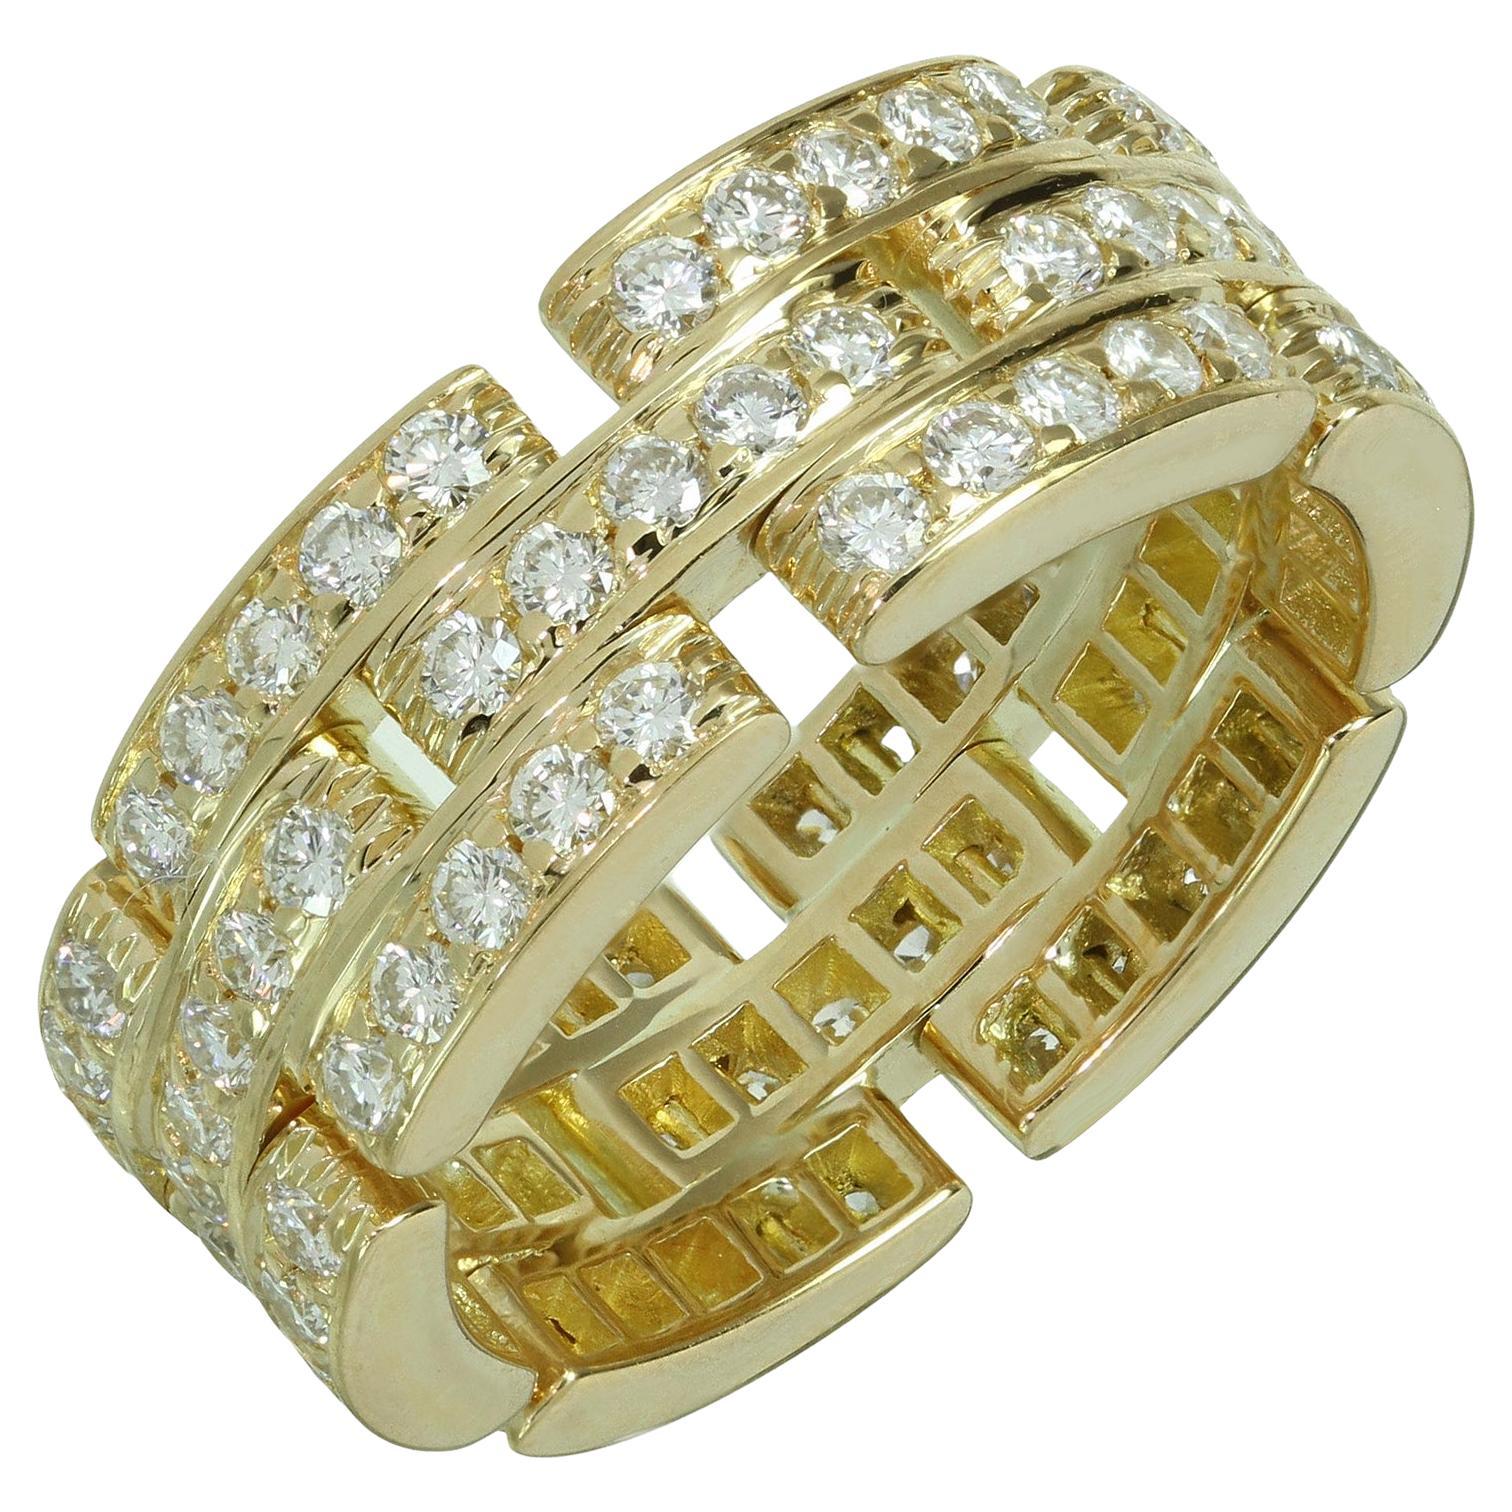 Cartier Maillon Panthere Full Diamond 18k Yellow Gold 3 Row Ring For Sale